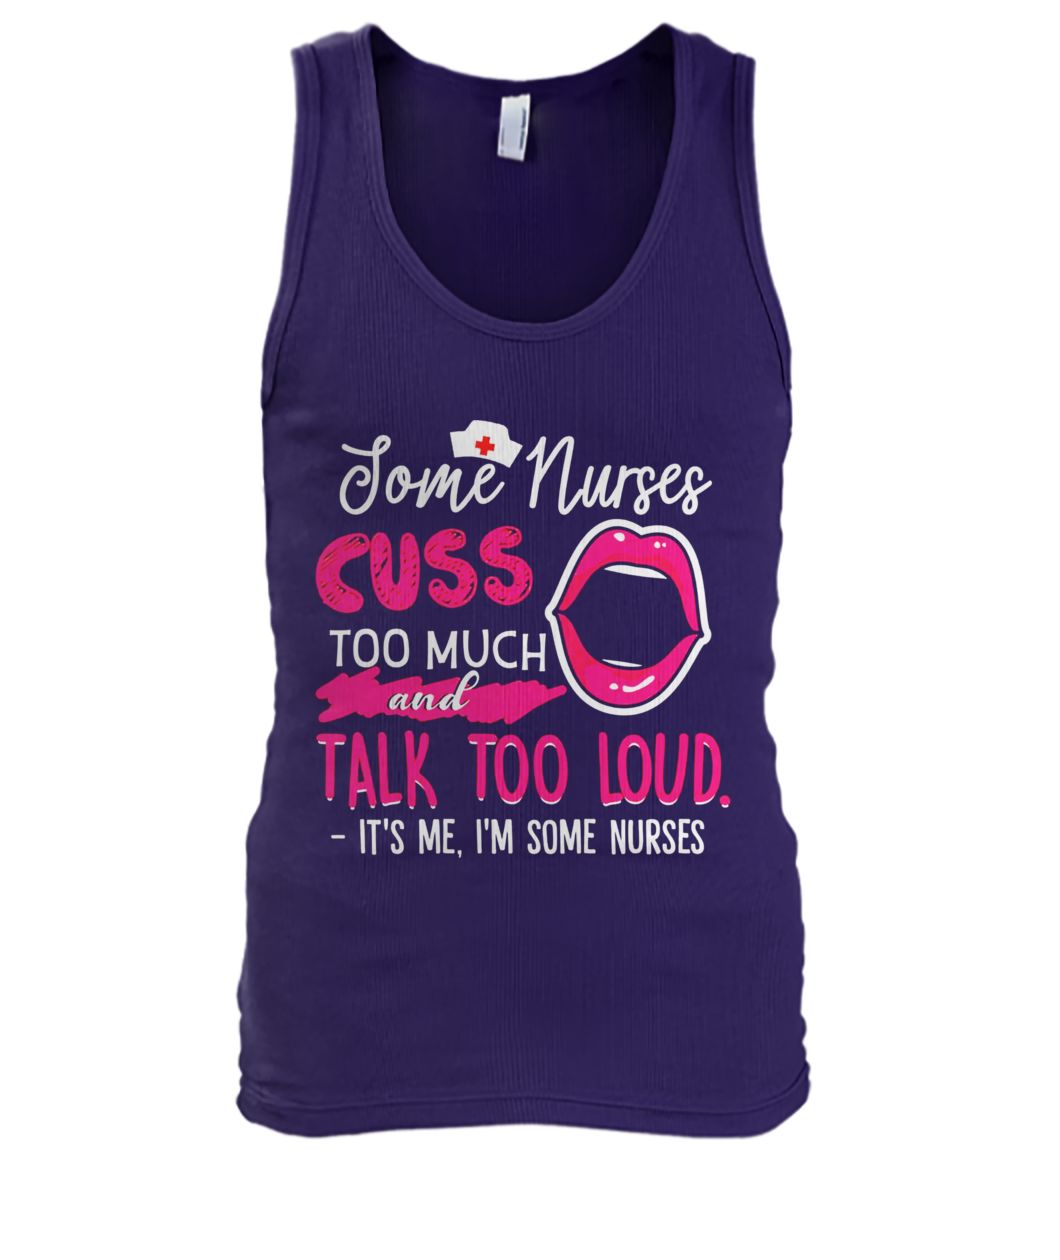 Some nurses cuss to much and talk too loud it's me I'm some nurses men's tank top